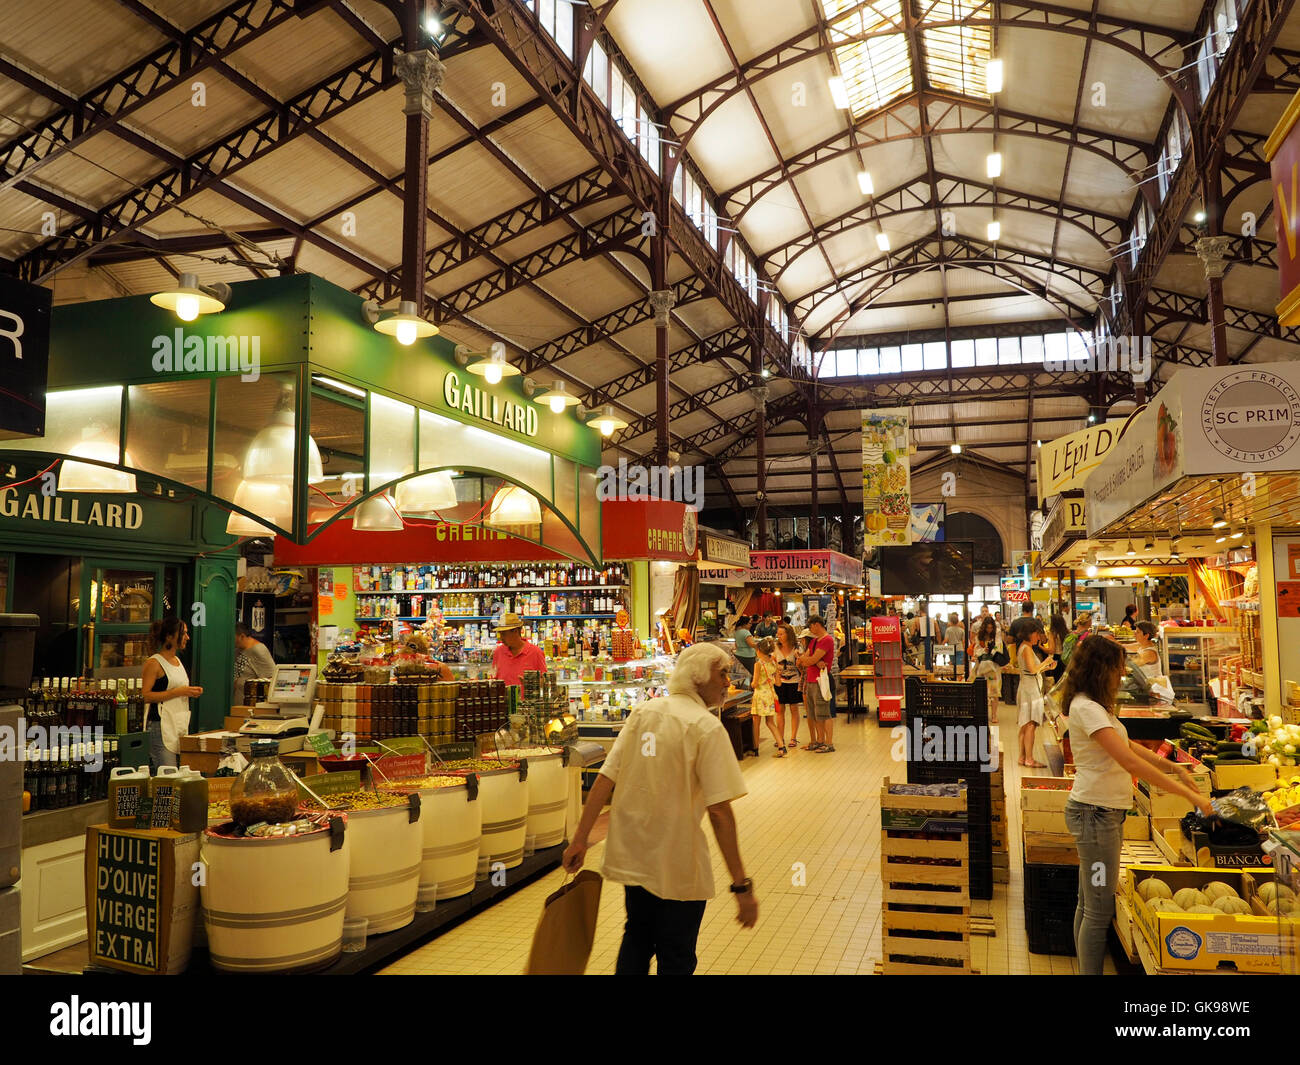 Inside les halles the food market halls in the city center of ...